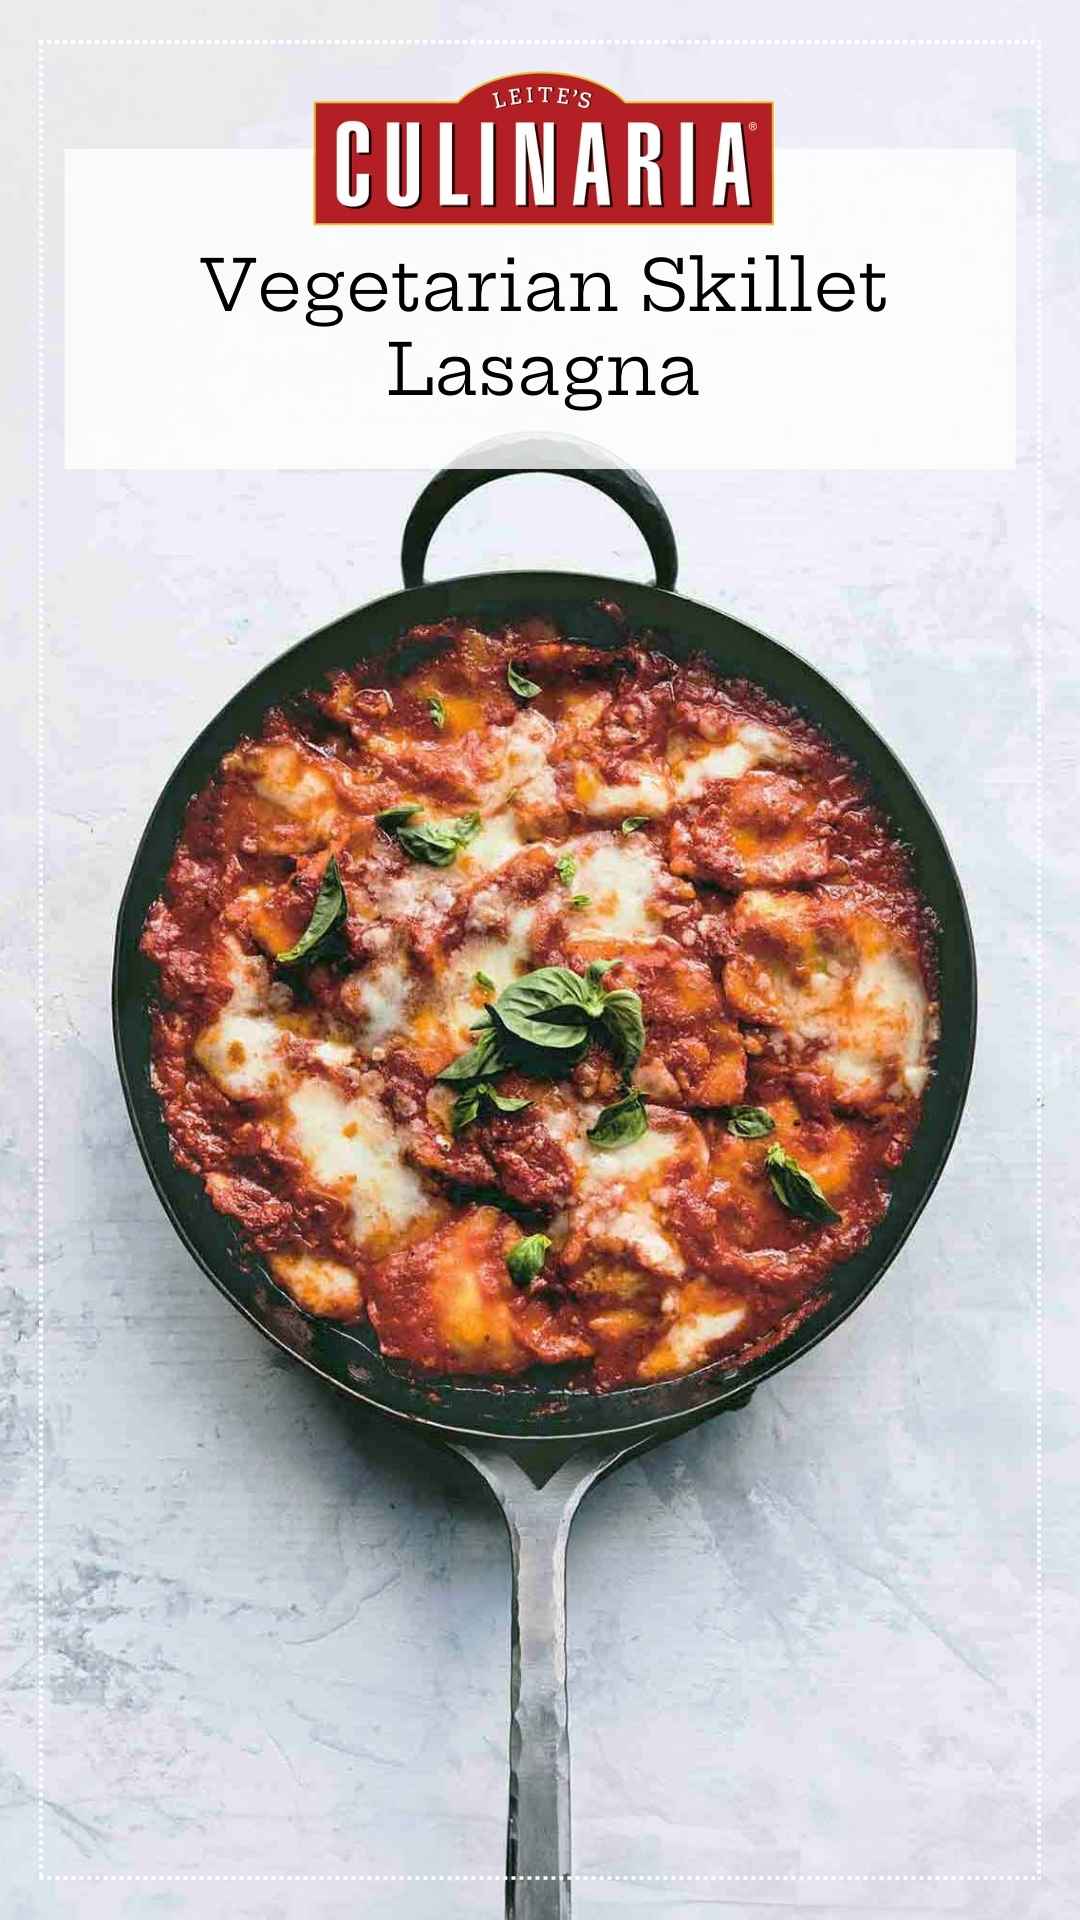 A skillet filled with ravioli in a cheesy tomato sauce with fresh basil leaves on top.